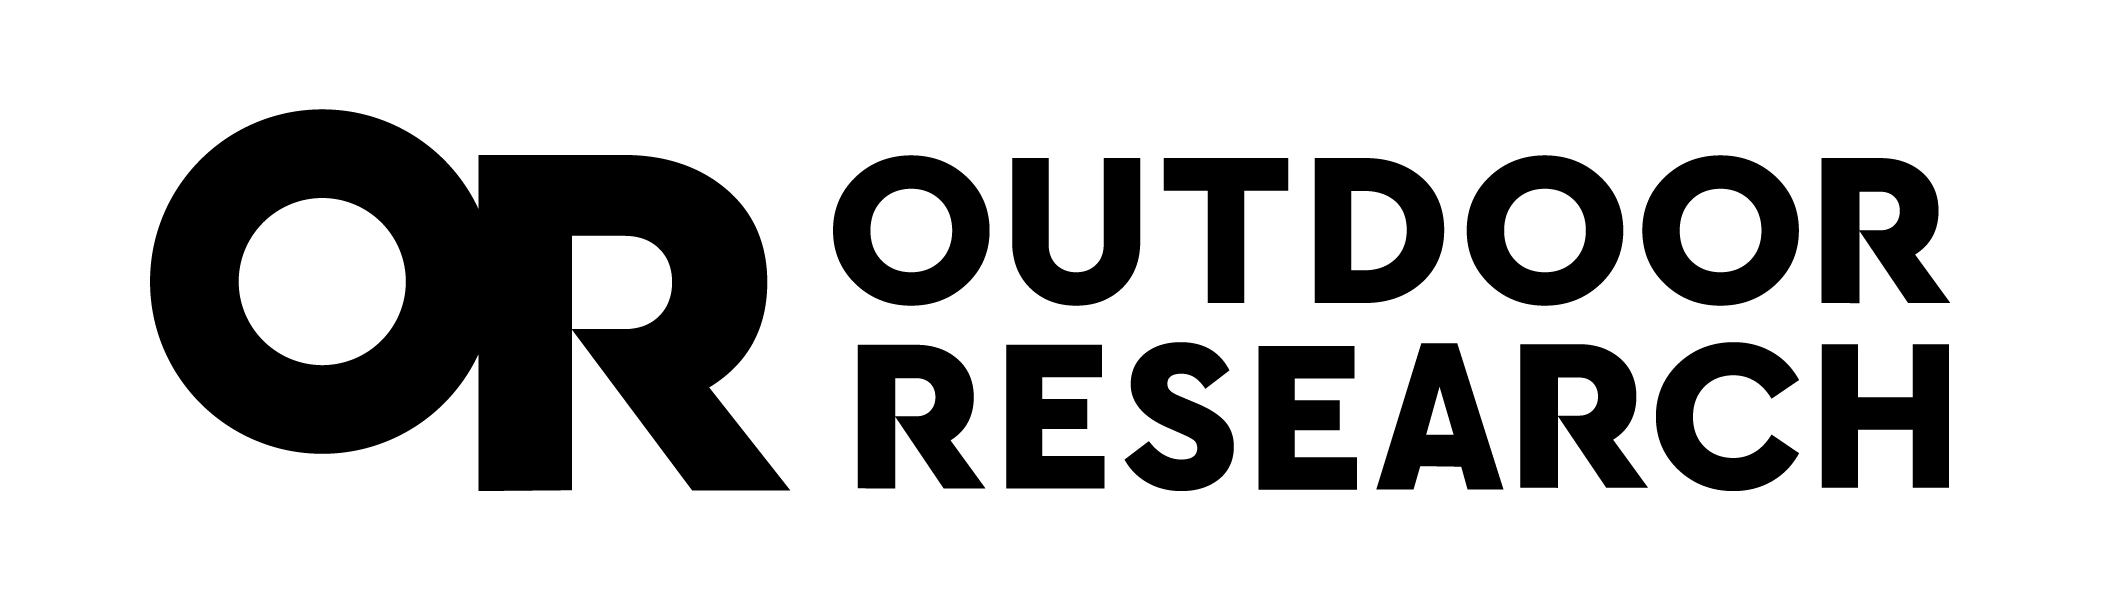 Outdoor Research logo